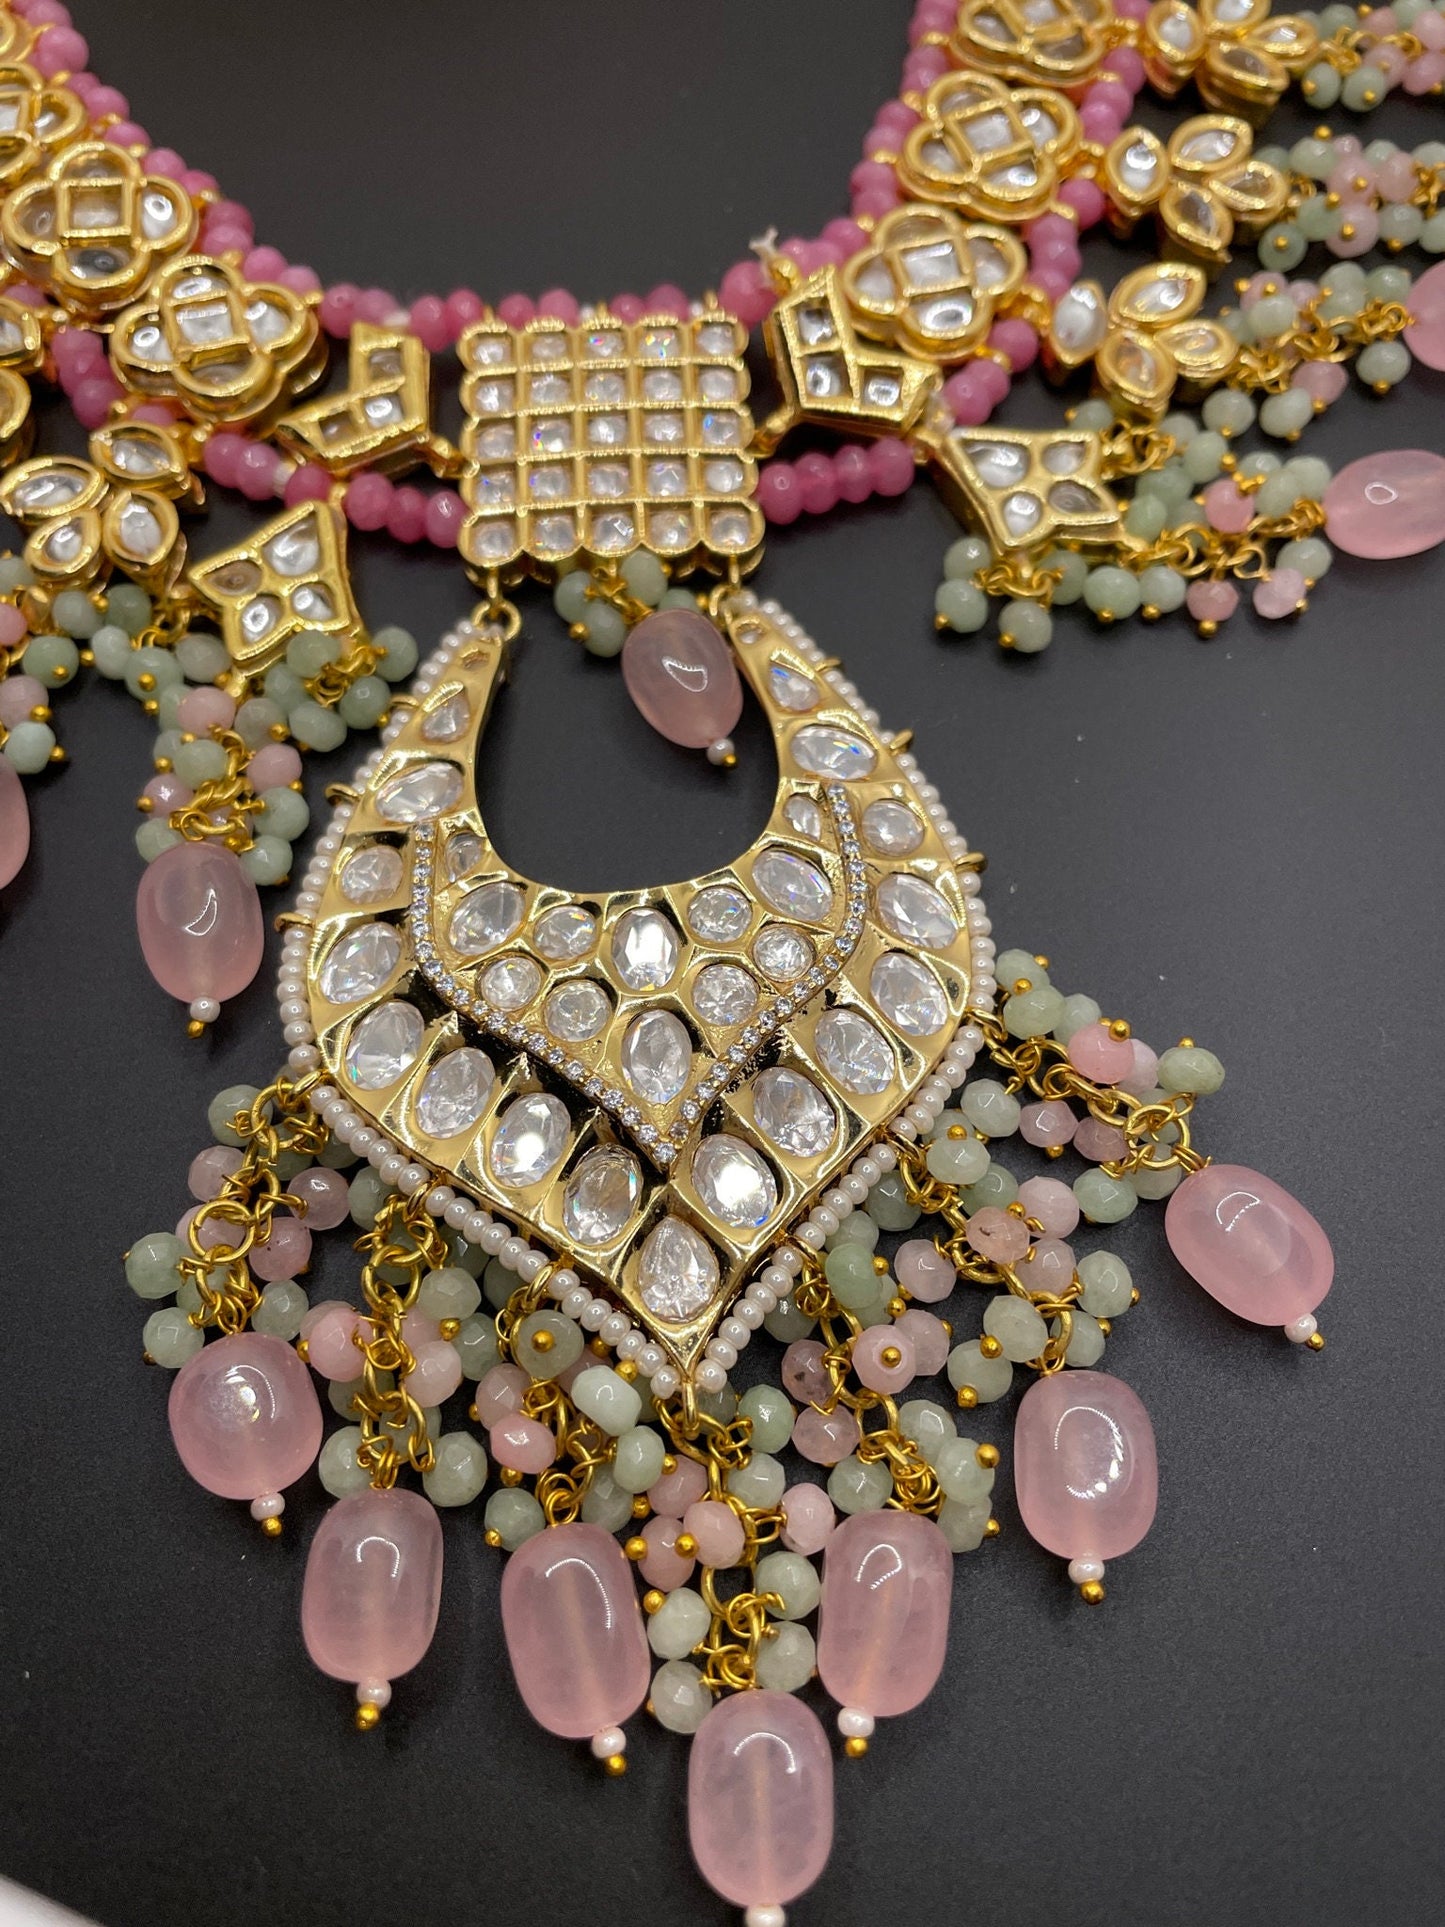 Rajasthani Jewelry/pink long Necklace/Indian Bollywood Jewelry/Indian bridal Necklace/Mehendi Jewelry/Bright Unique Indian Necklace jhumka